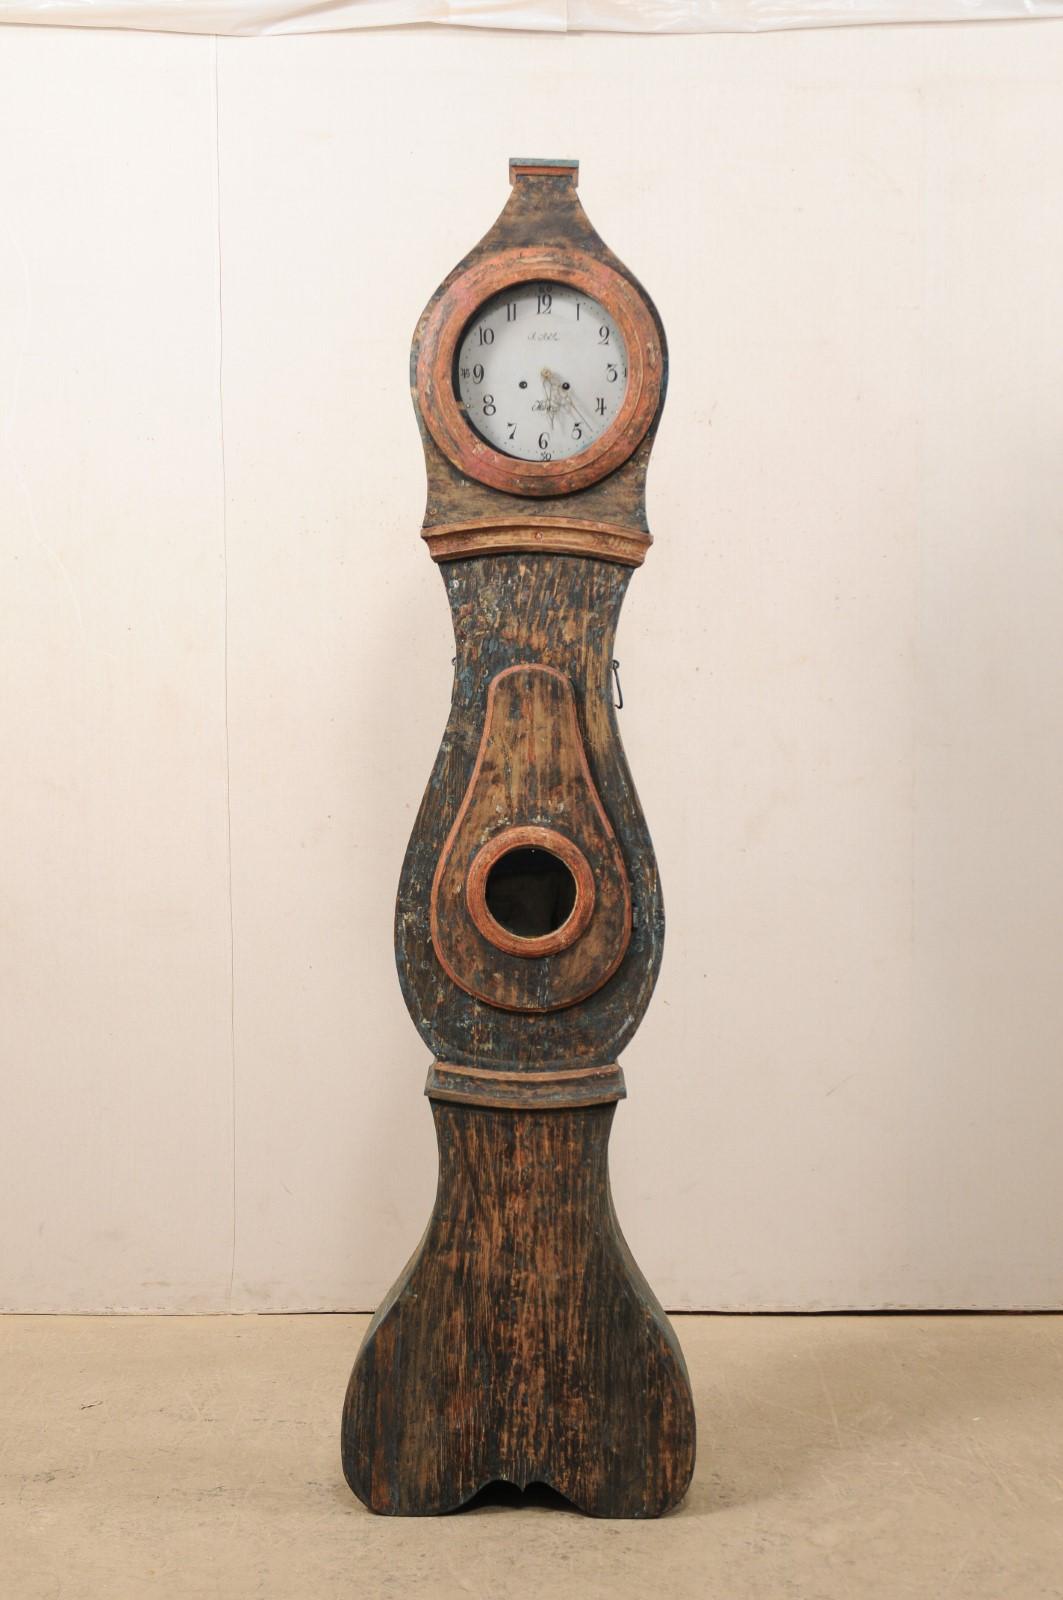 An early 19th century Northern Swedish painted wood grandfather clock. This antique floor clock from Sweden (Northern region) features a raised top crest or bonnet with flat top, with face, neck, and belly accented with trim molding, and raised on a